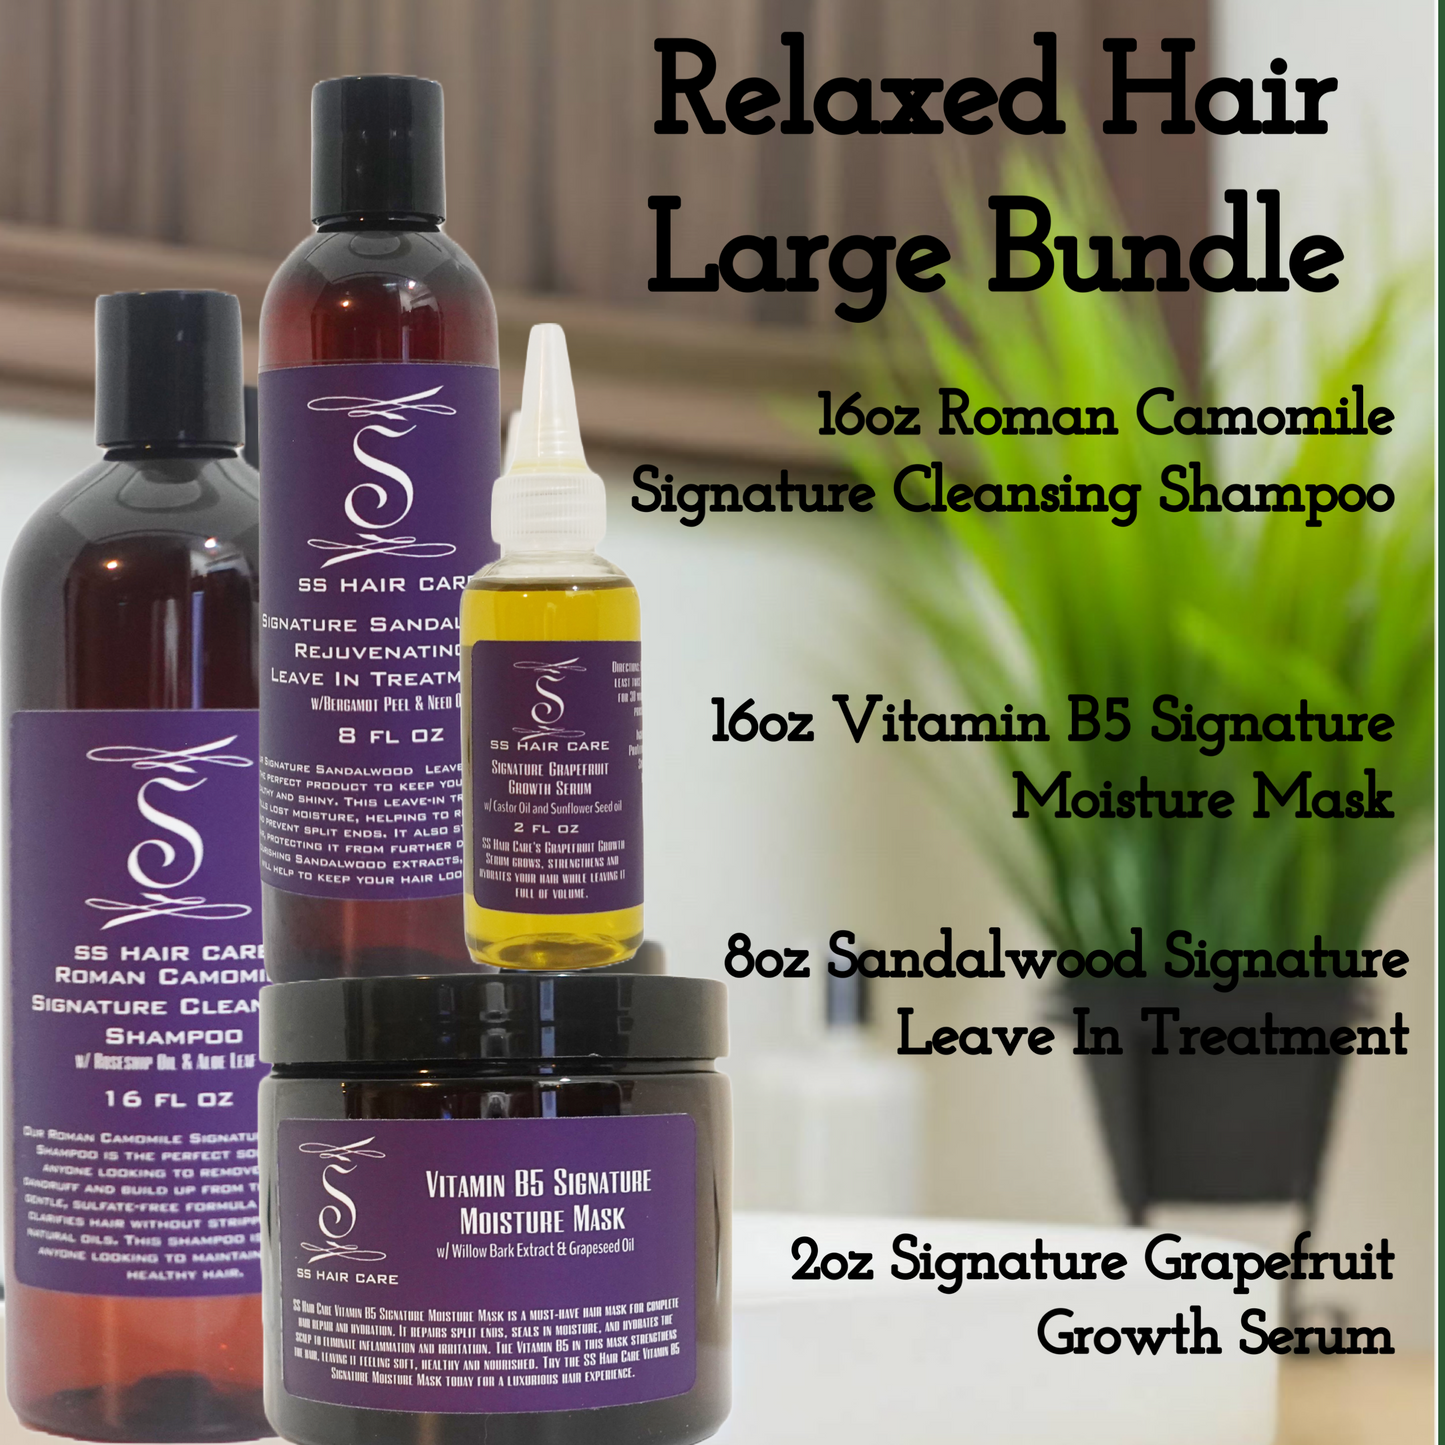 SS Hair Care Growth Retention System For Naturally Curly or Relaxed Hair® ⭐⭐⭐⭐⭐